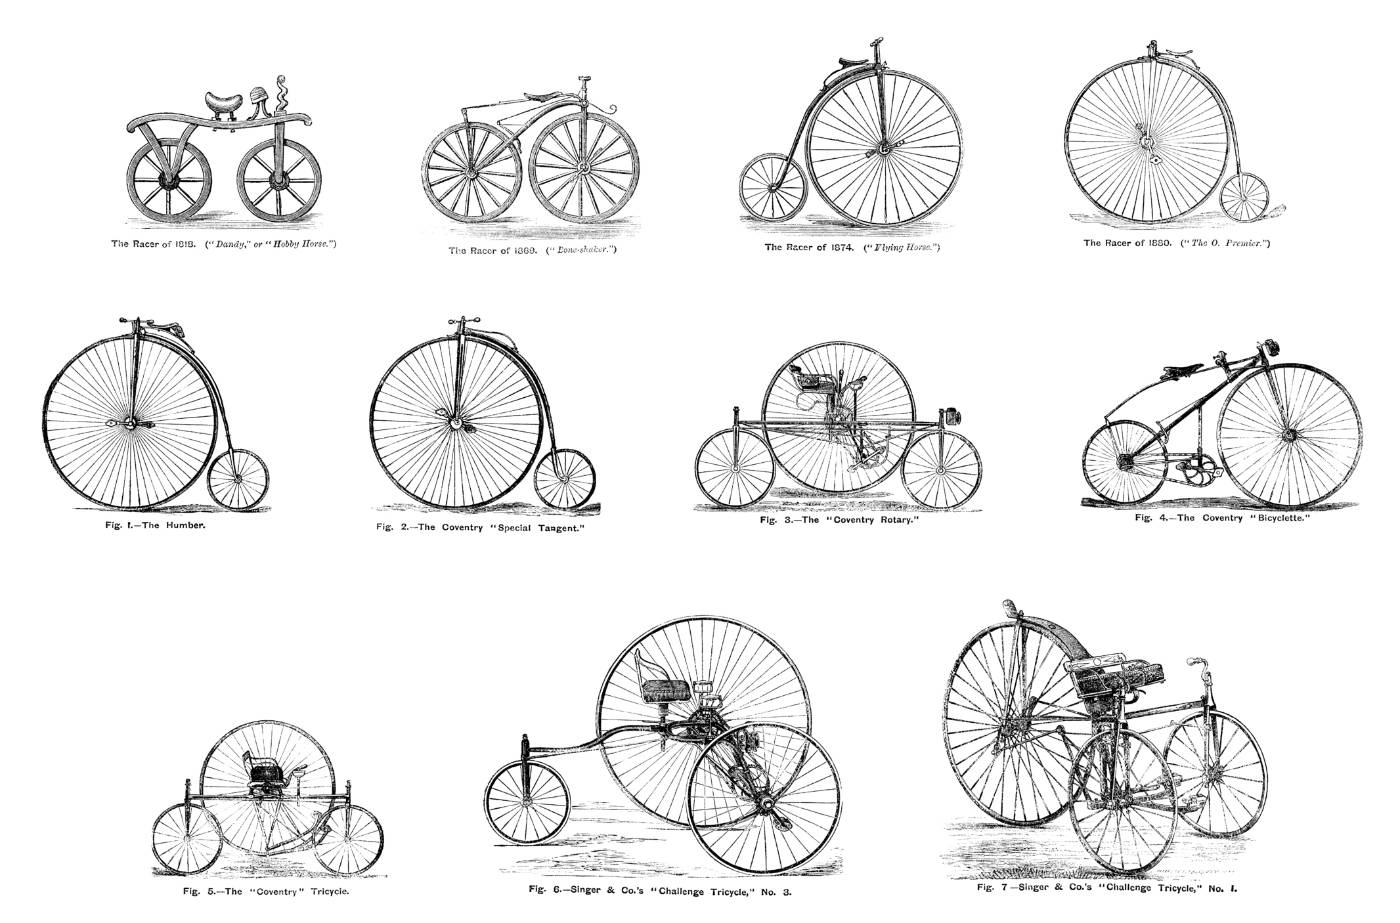 The Most Important Person to Have Invented a Bicycle